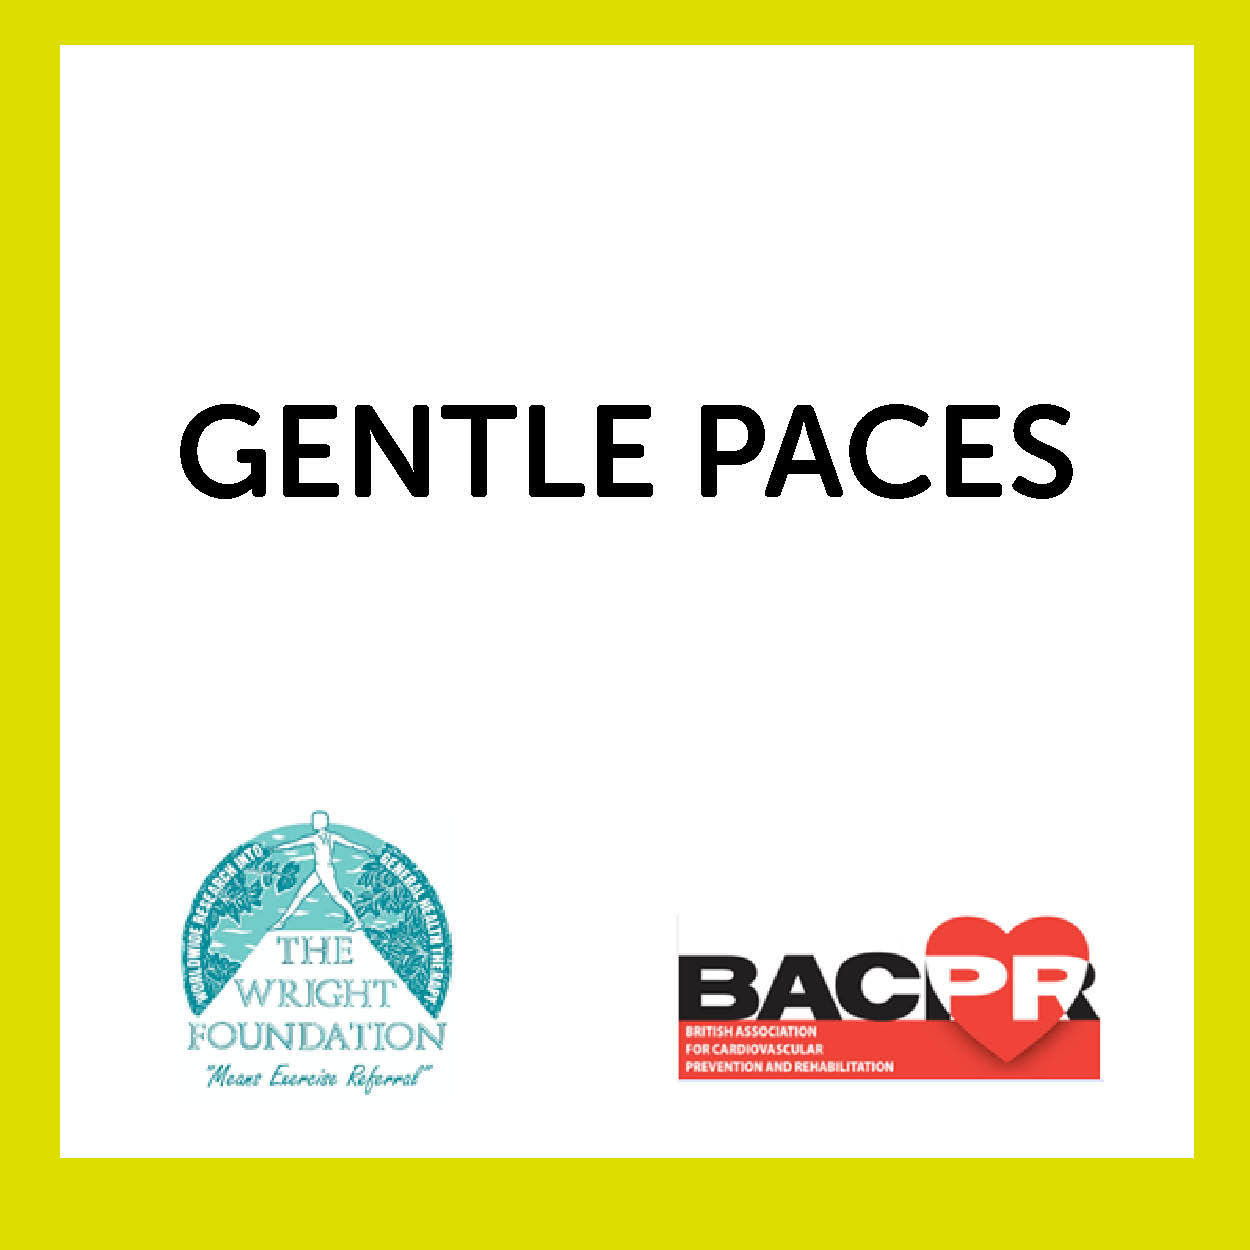 GENTLE PACES